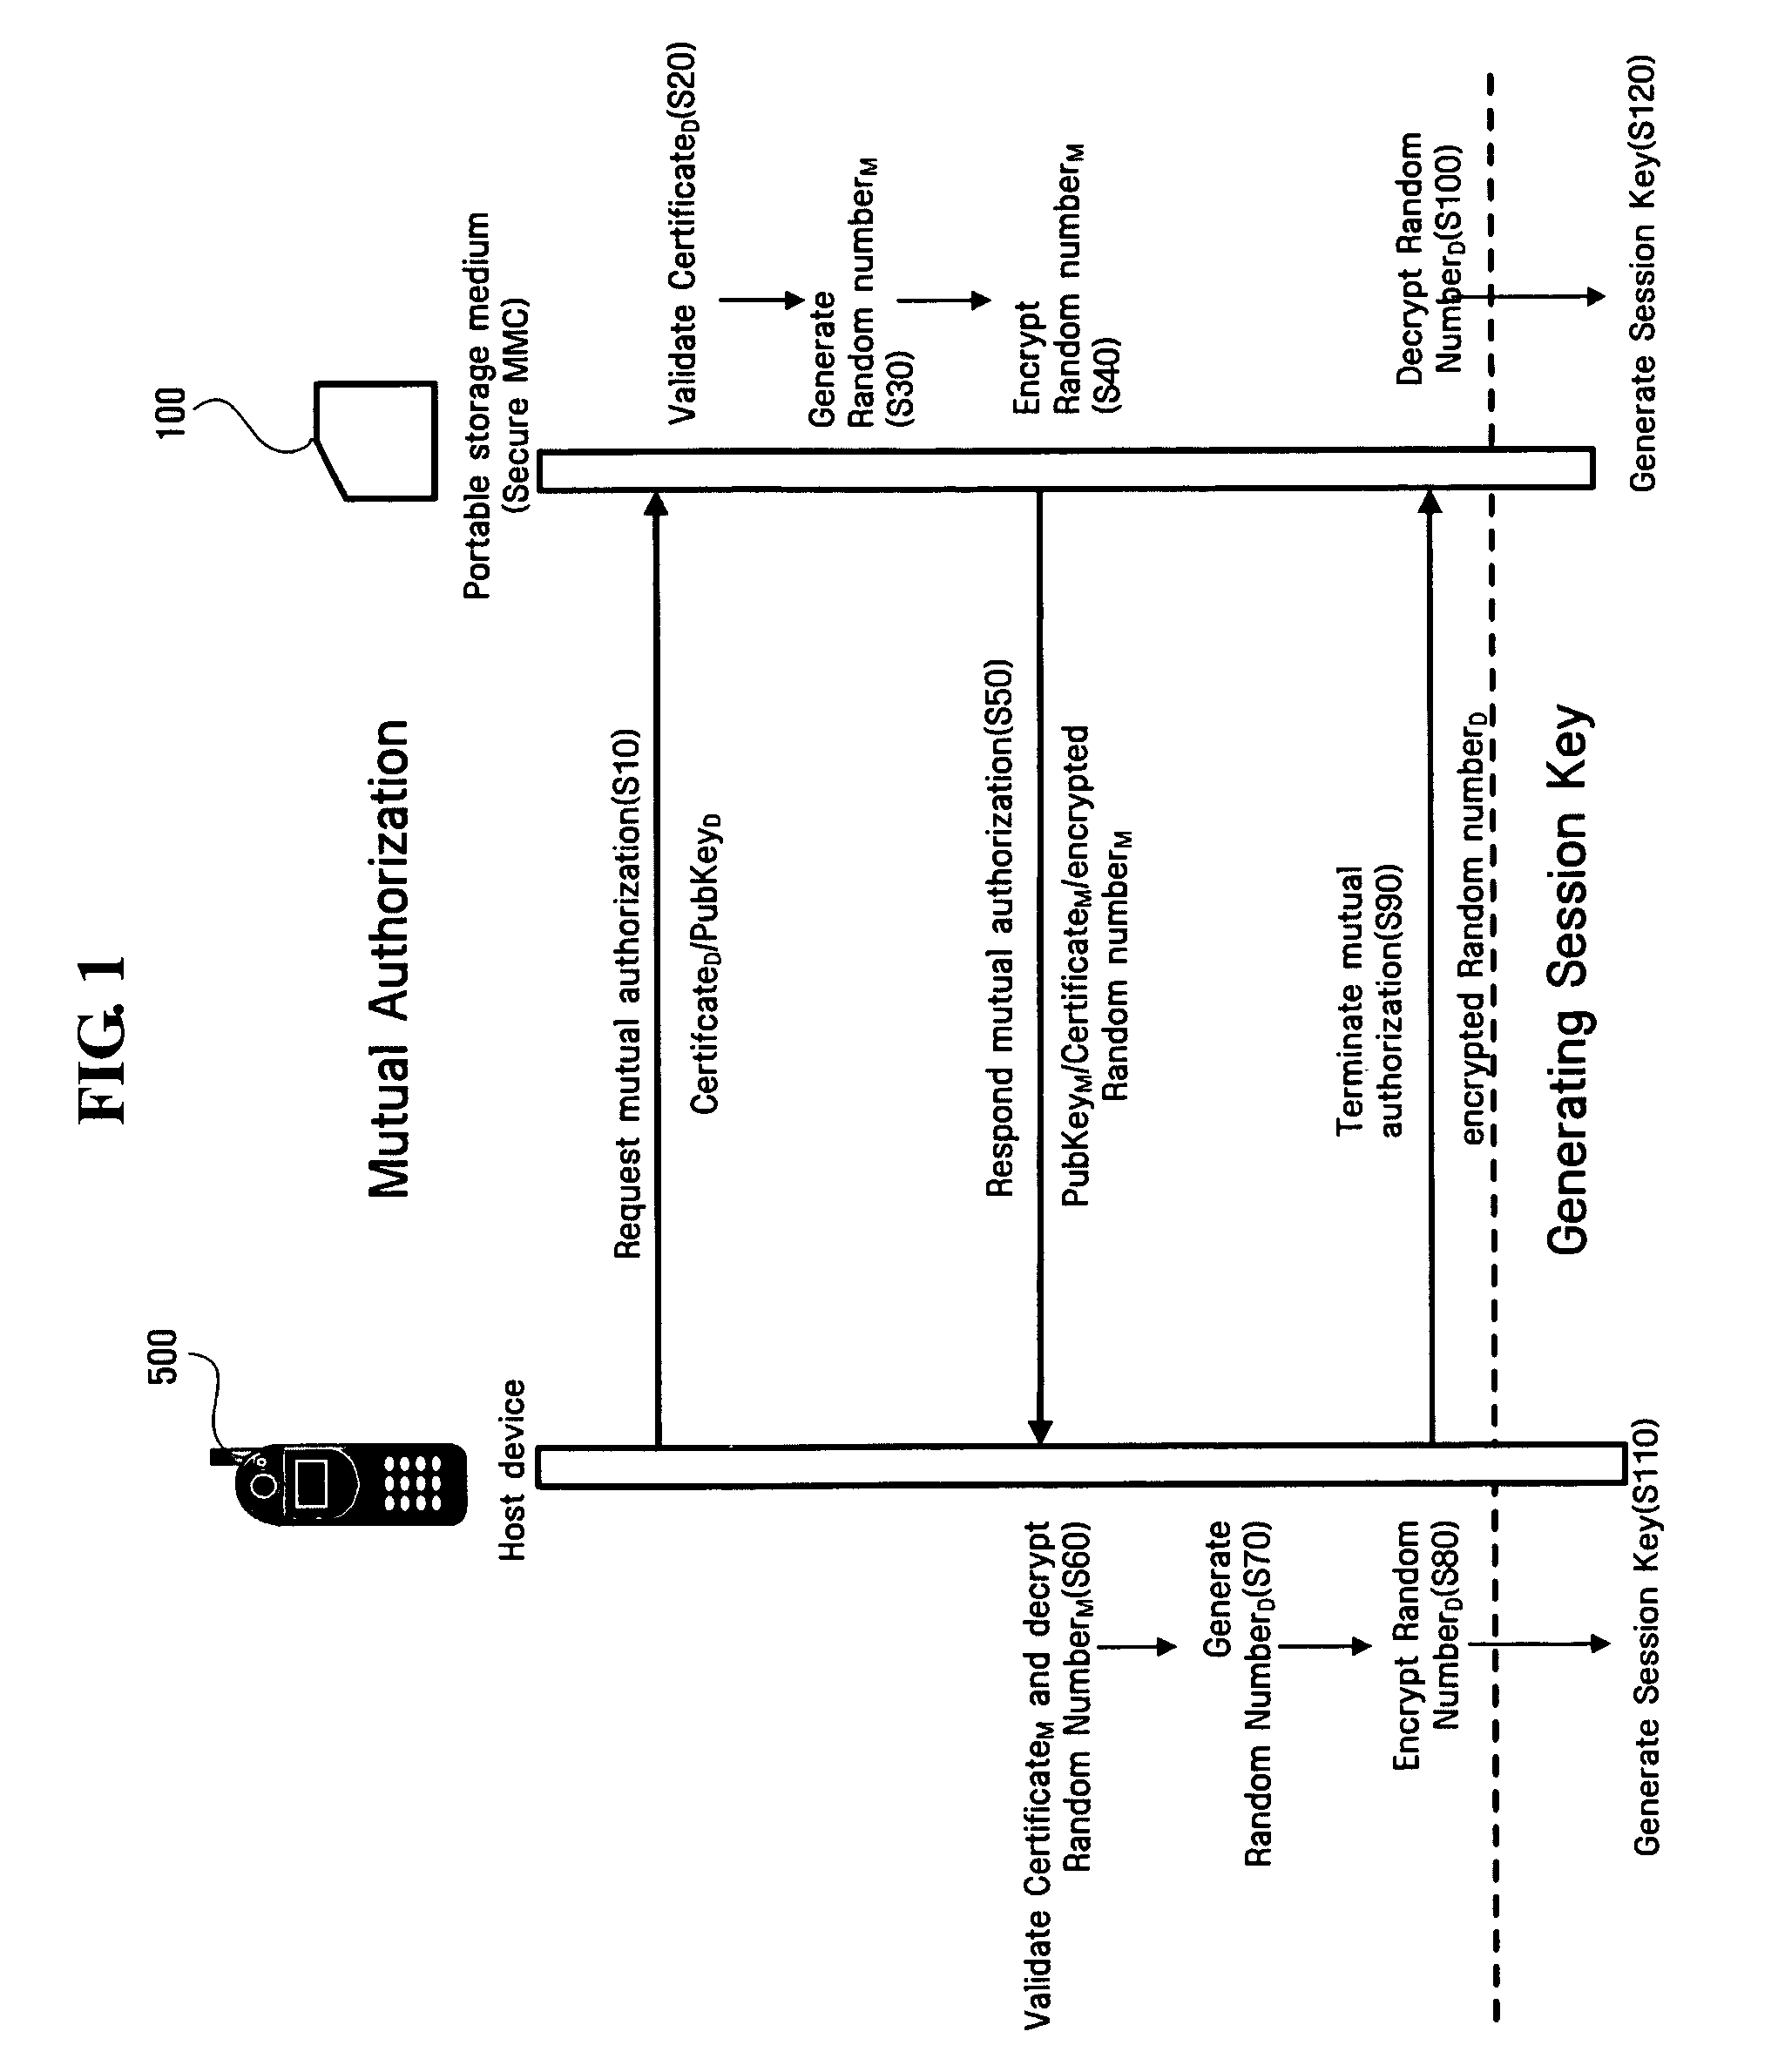 Method and apparatus for searching for rights objects stored in portable storage device object identifier